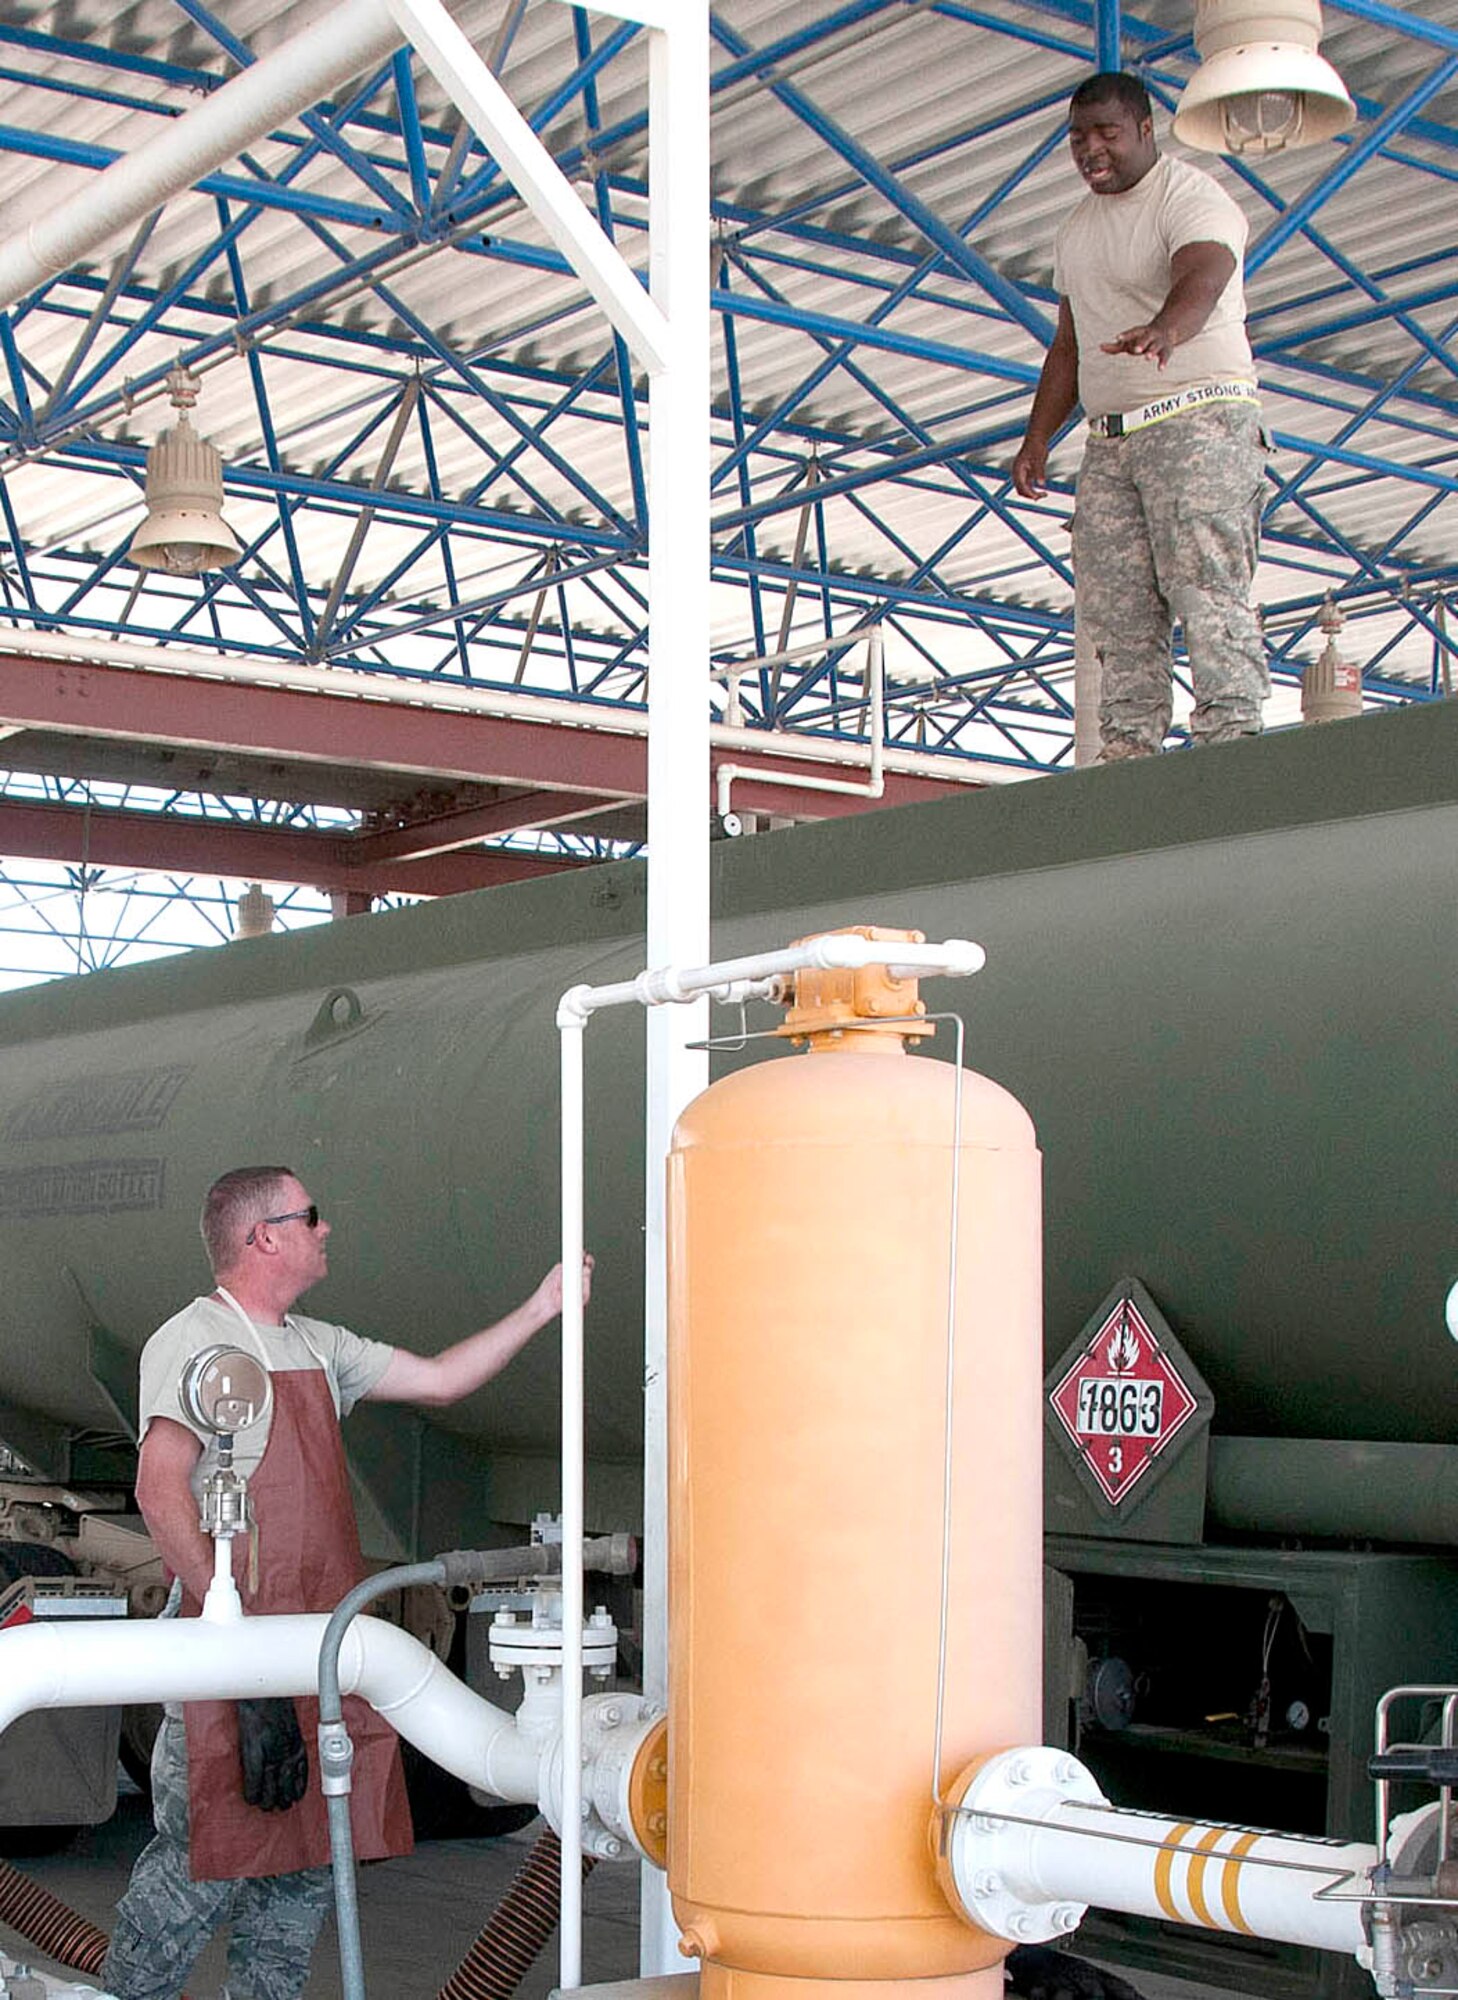 Army Reserve Pvt. Jamarcus McGee, top, checks a fuel tanker seal while Staff Sgt. Buzz Decker verifies seal numbers below before unloading fuel at the Arizona Air National Guard’s 162nd Fighter Wing at Tucson International Airport, June 21. Soldiers delivered JP8 to 73 F-16 Fighting Falcons here for two weeks as part of their annual Quartermaster Liquid Logistics Exercise. (U.S. Air Force photo/Master Sgt. Dave Neve)